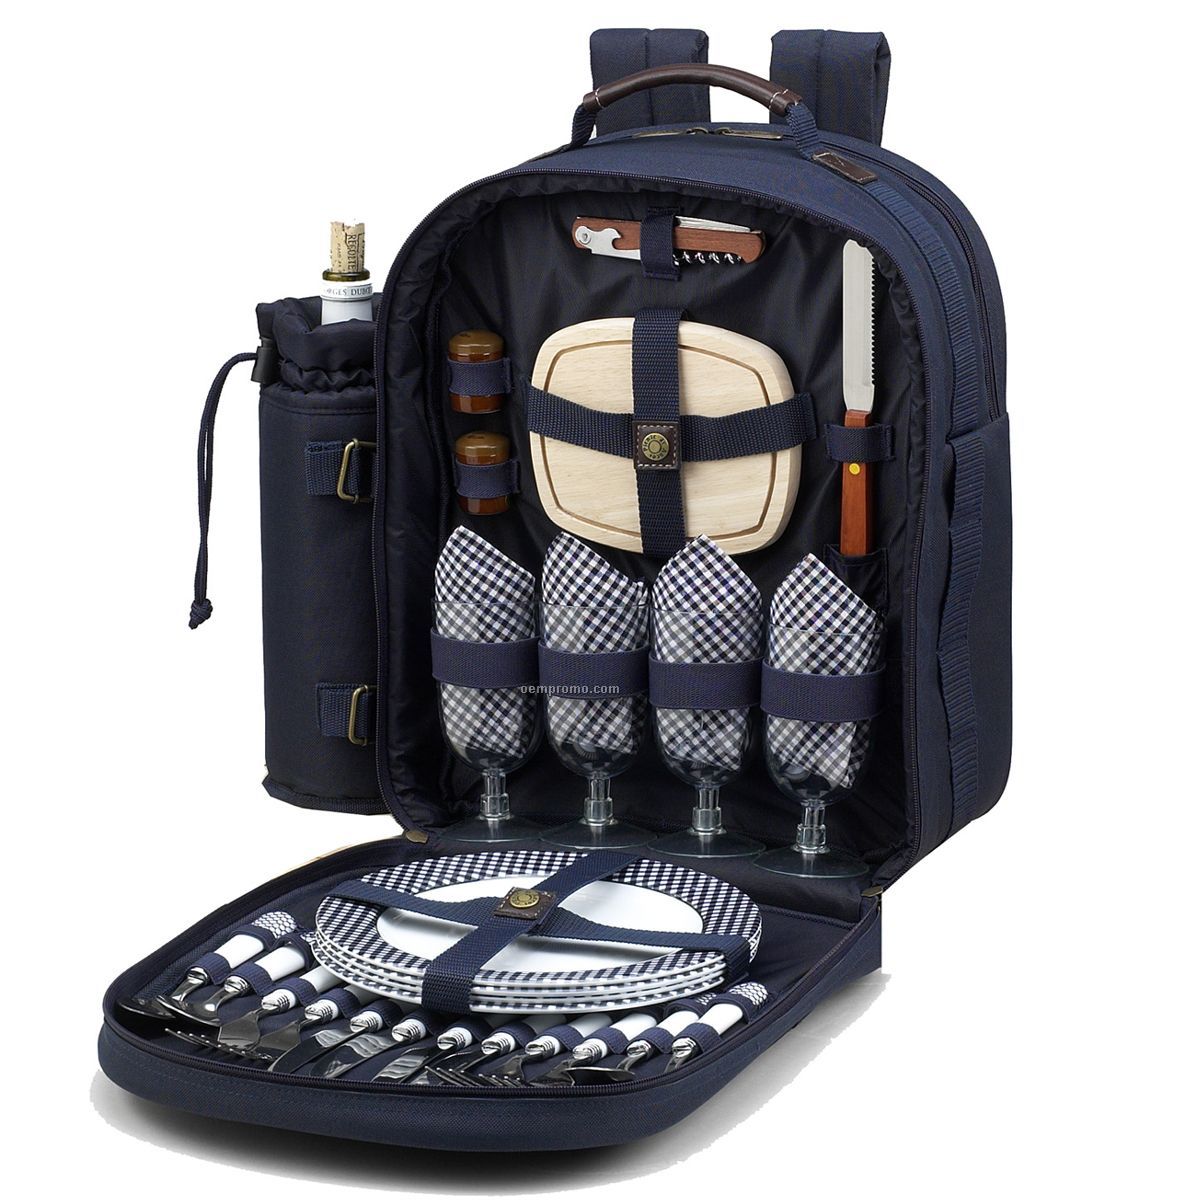 Picnic Backpack For Four